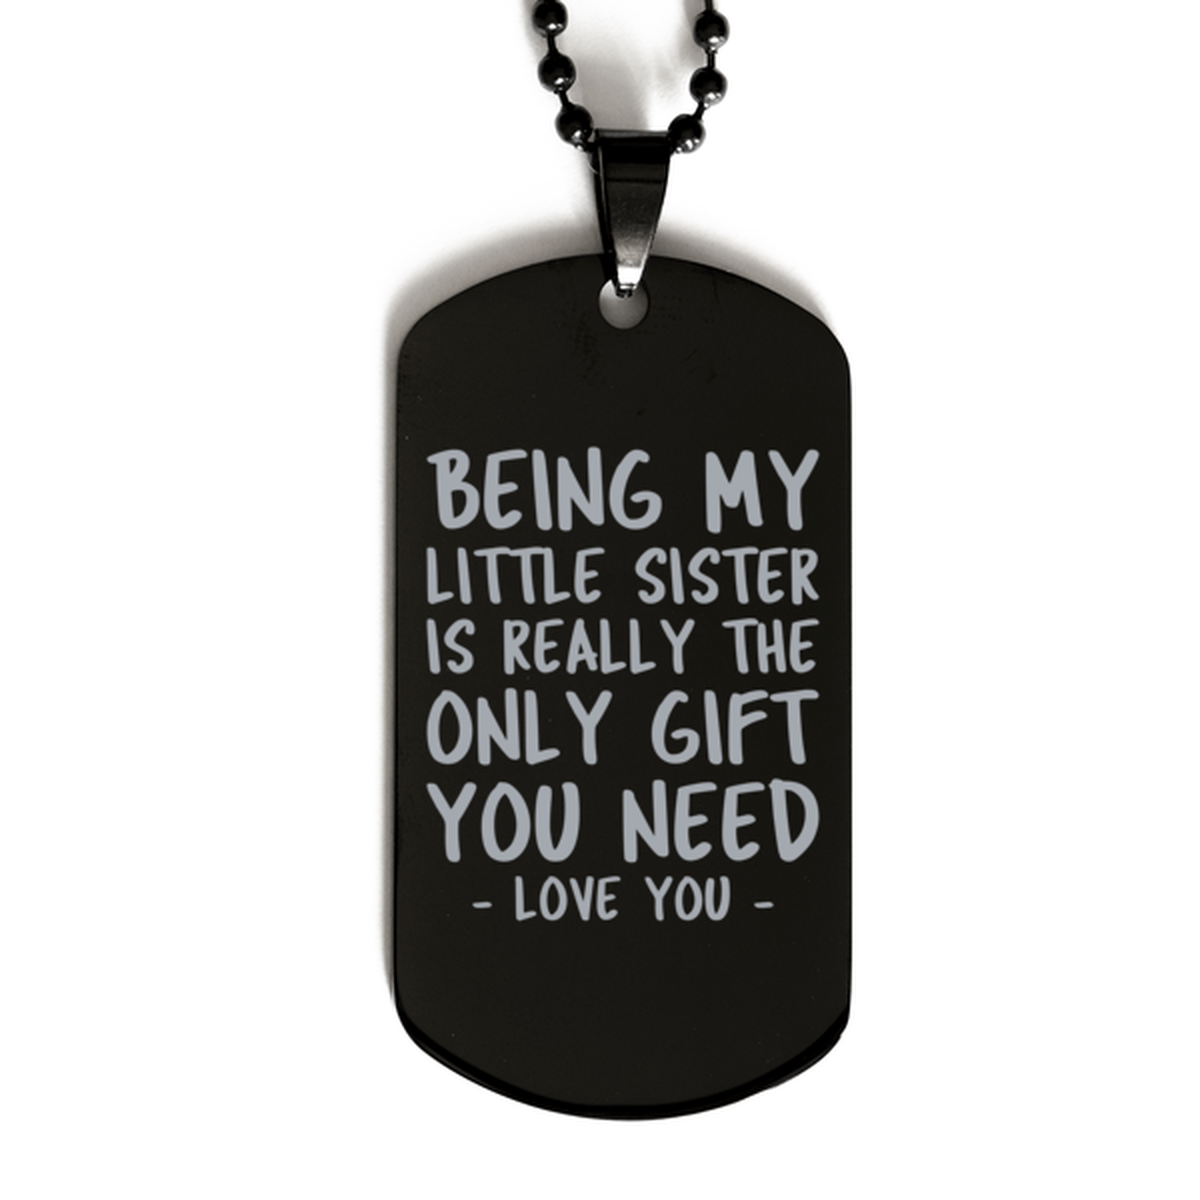 Funny Little Sister Black Dog Tag Necklace, Being My Little Sister Is Really the Only Gift You Need, Best Birthday Gifts for Little Sister